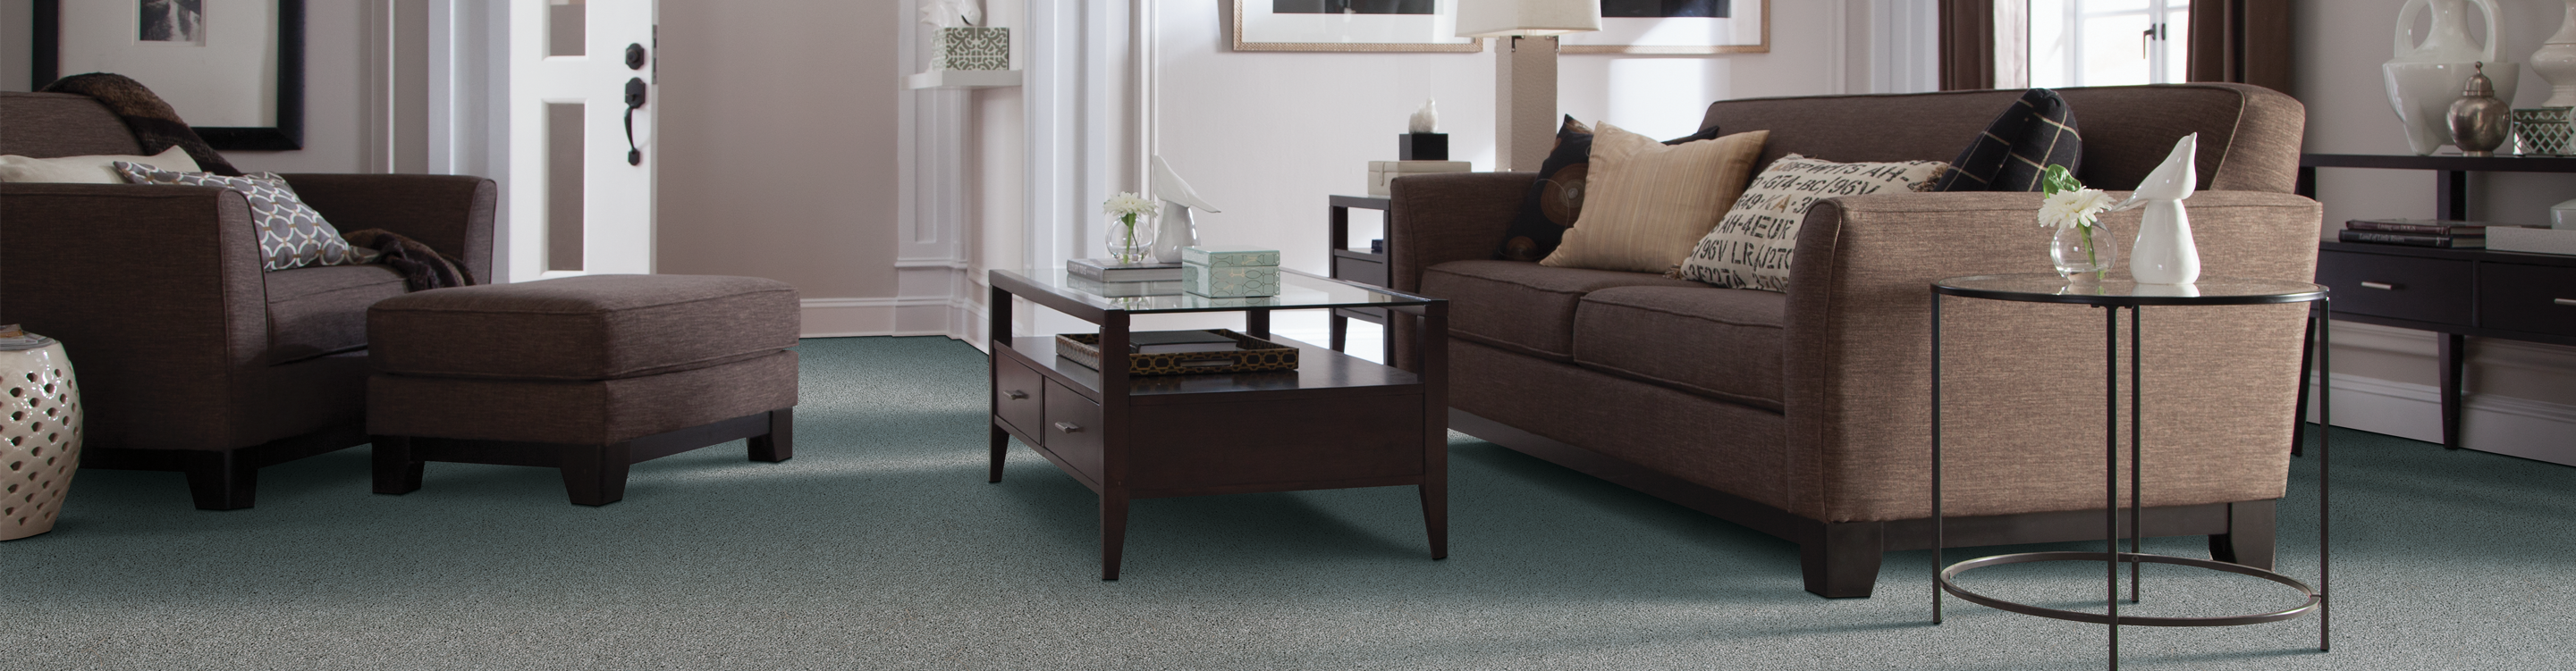 Green grey carpet in living room with leather charir 